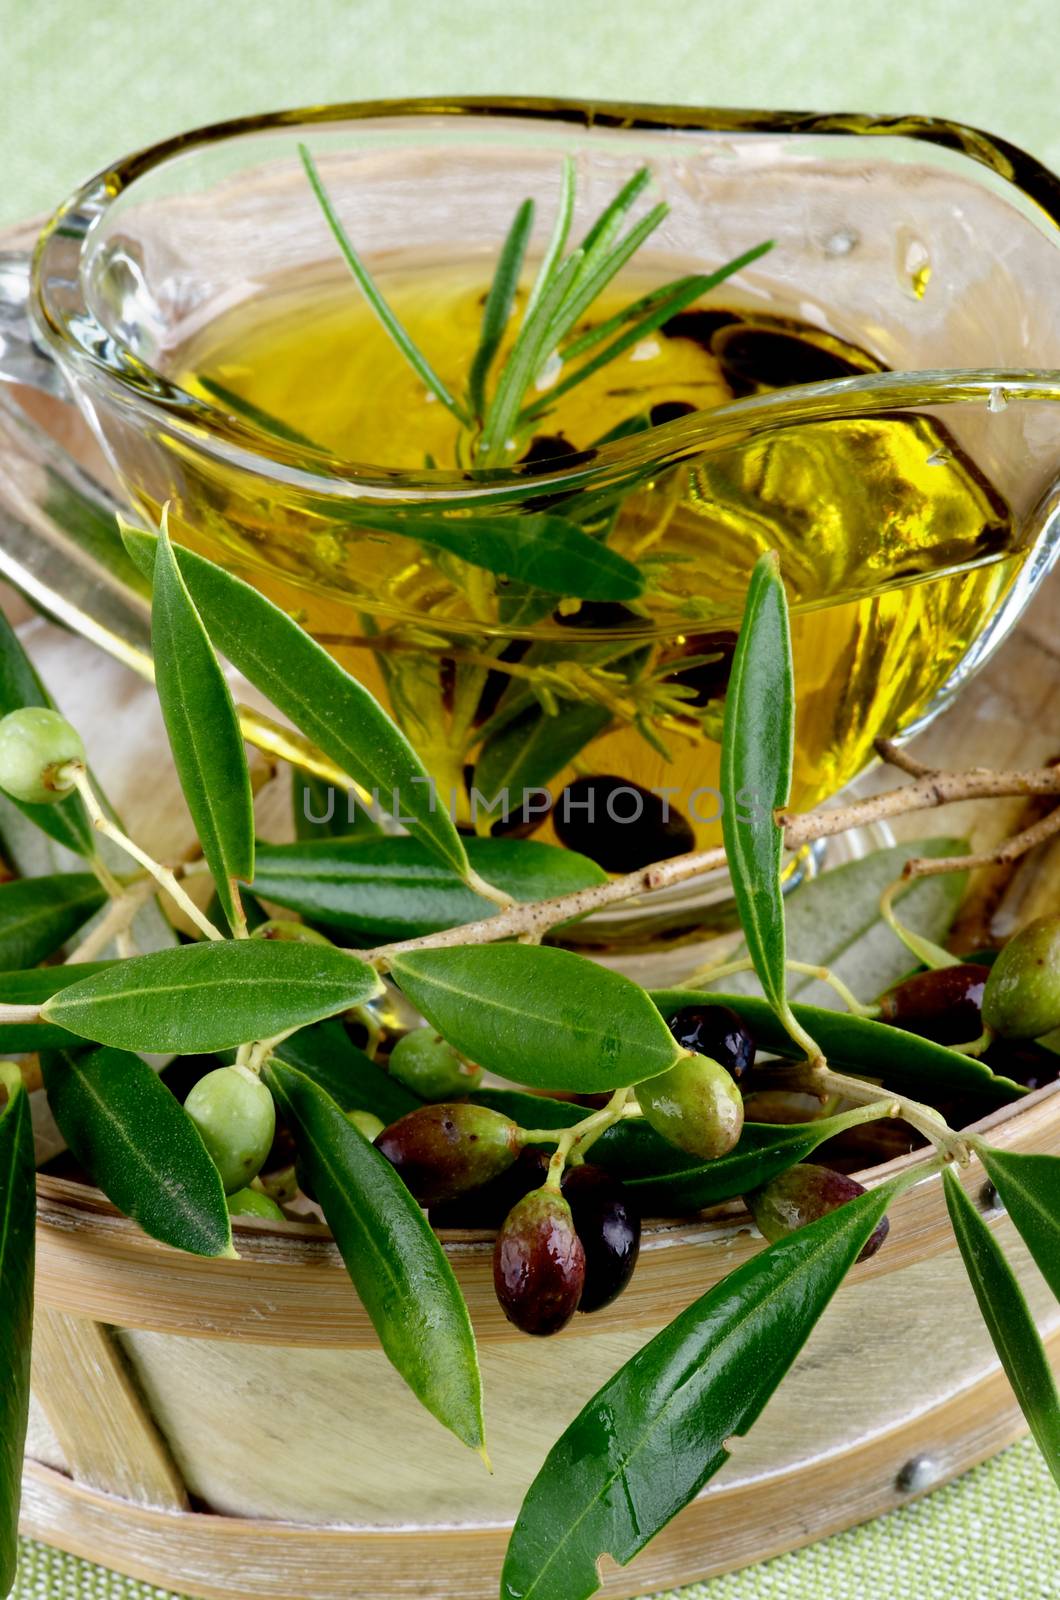 Raw Green and Black Olives with Leafs with Olive Oil in Glass Gravy in Wooden Bowl closeup on Green Textile background